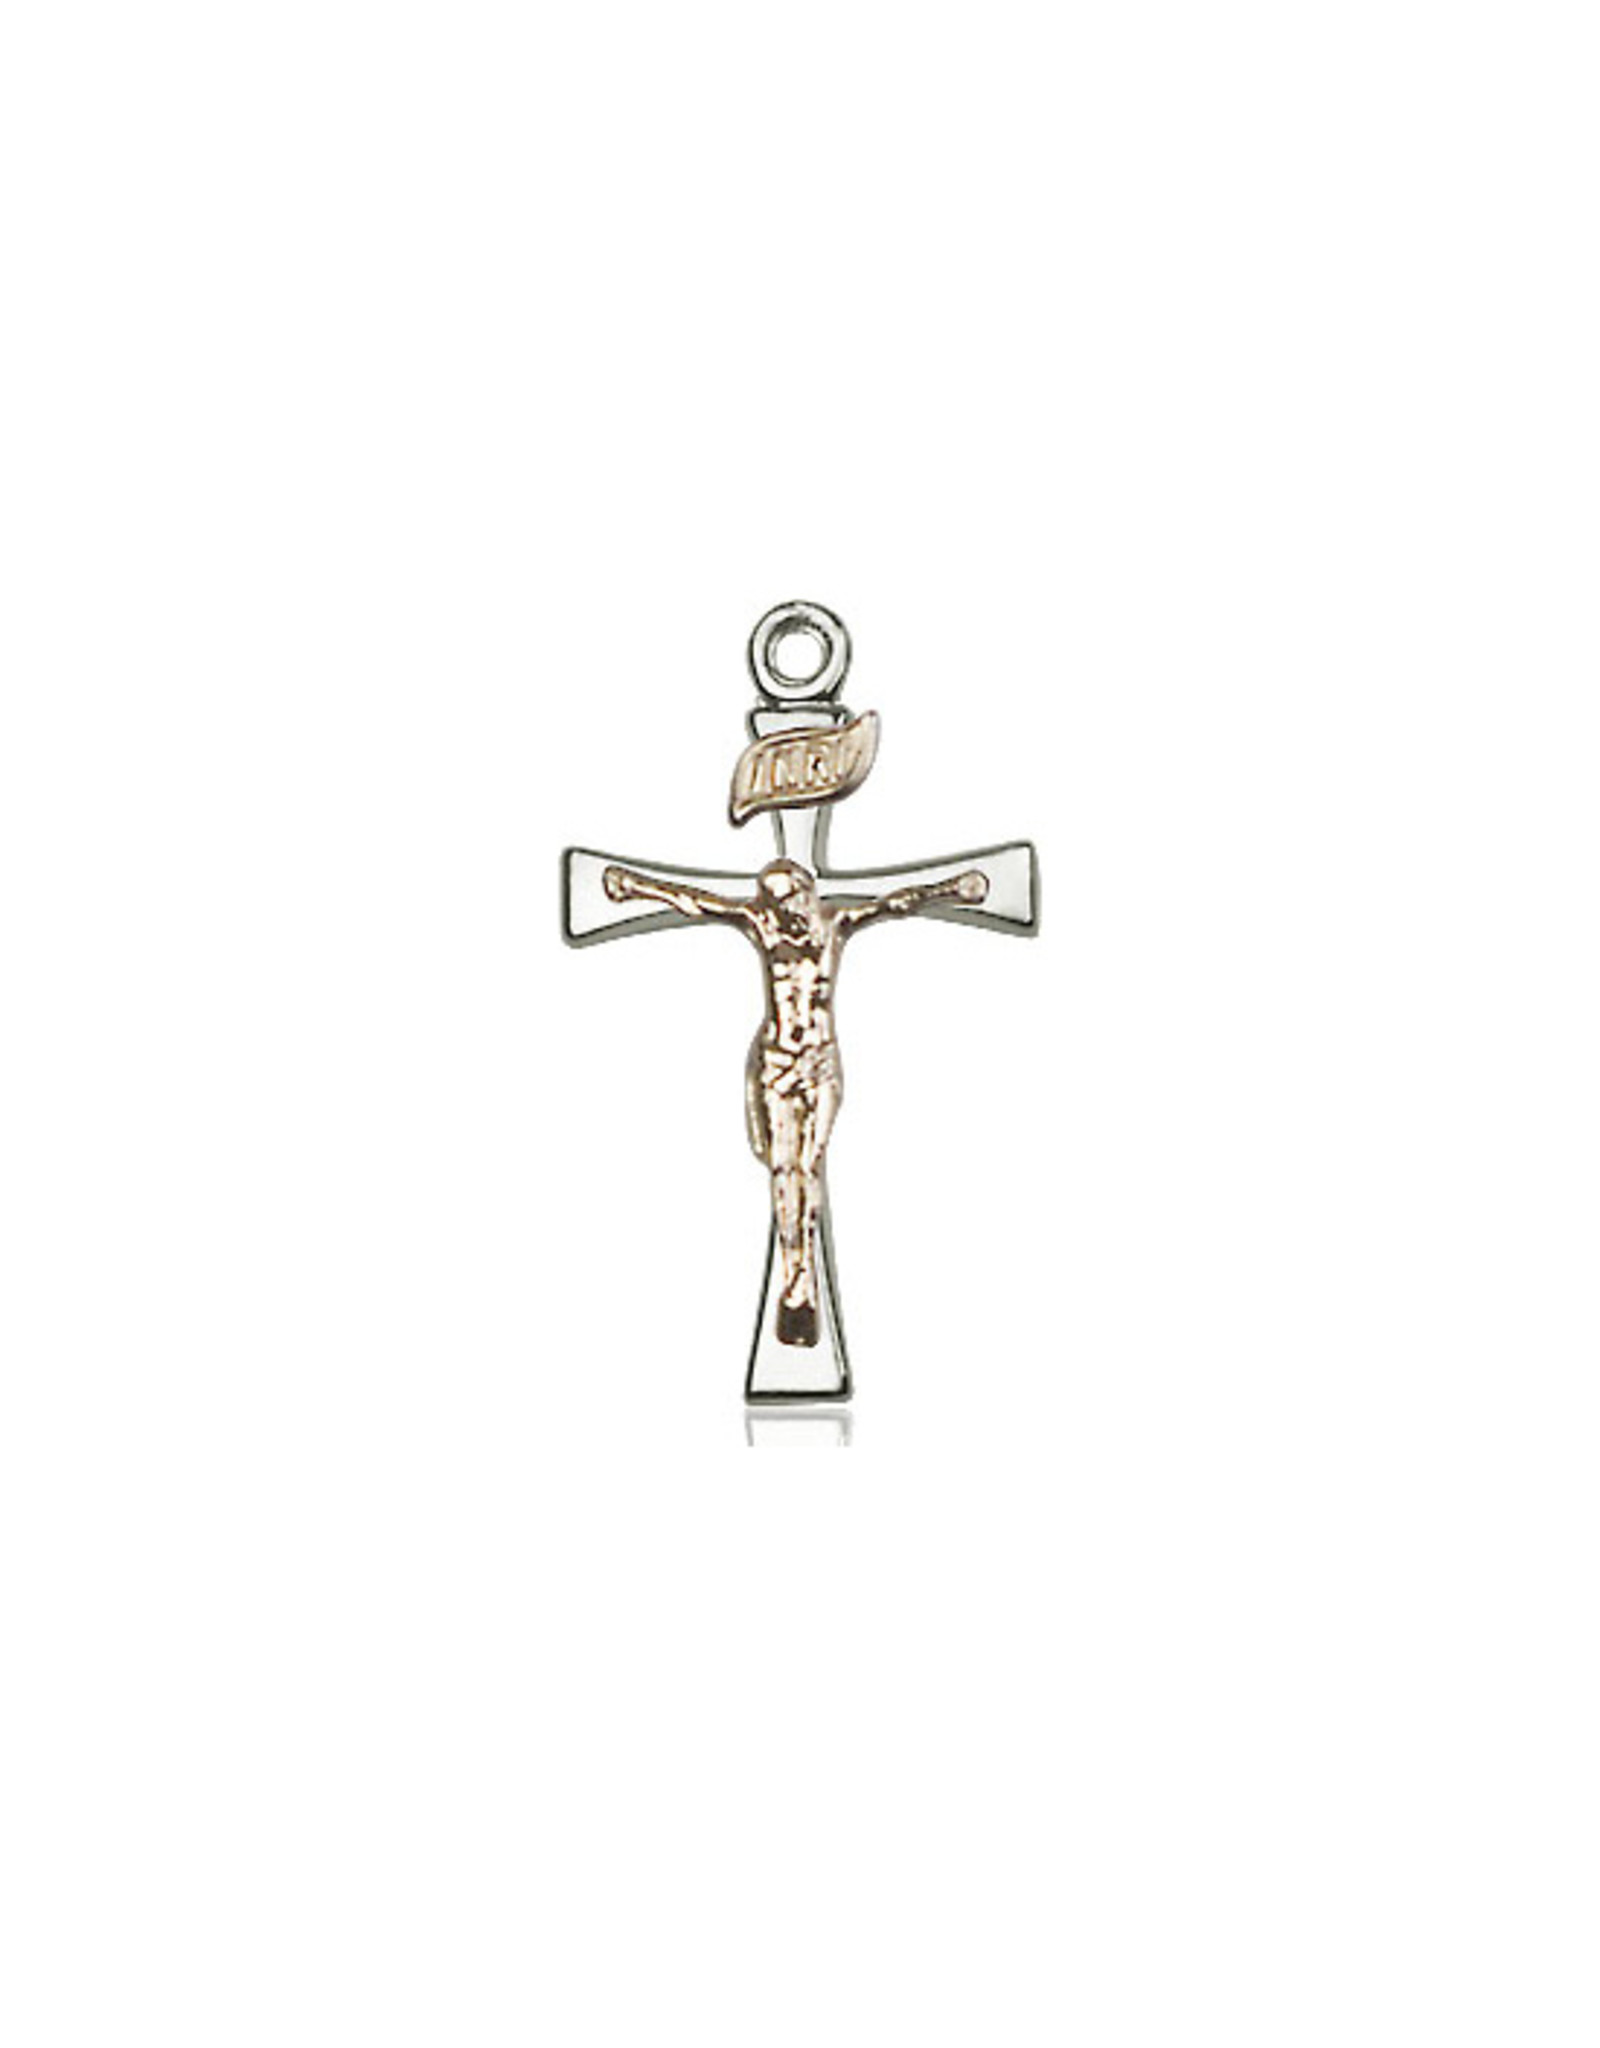 MEDAL CRUCIFIX GOLD FILLED/STERLING SILVER